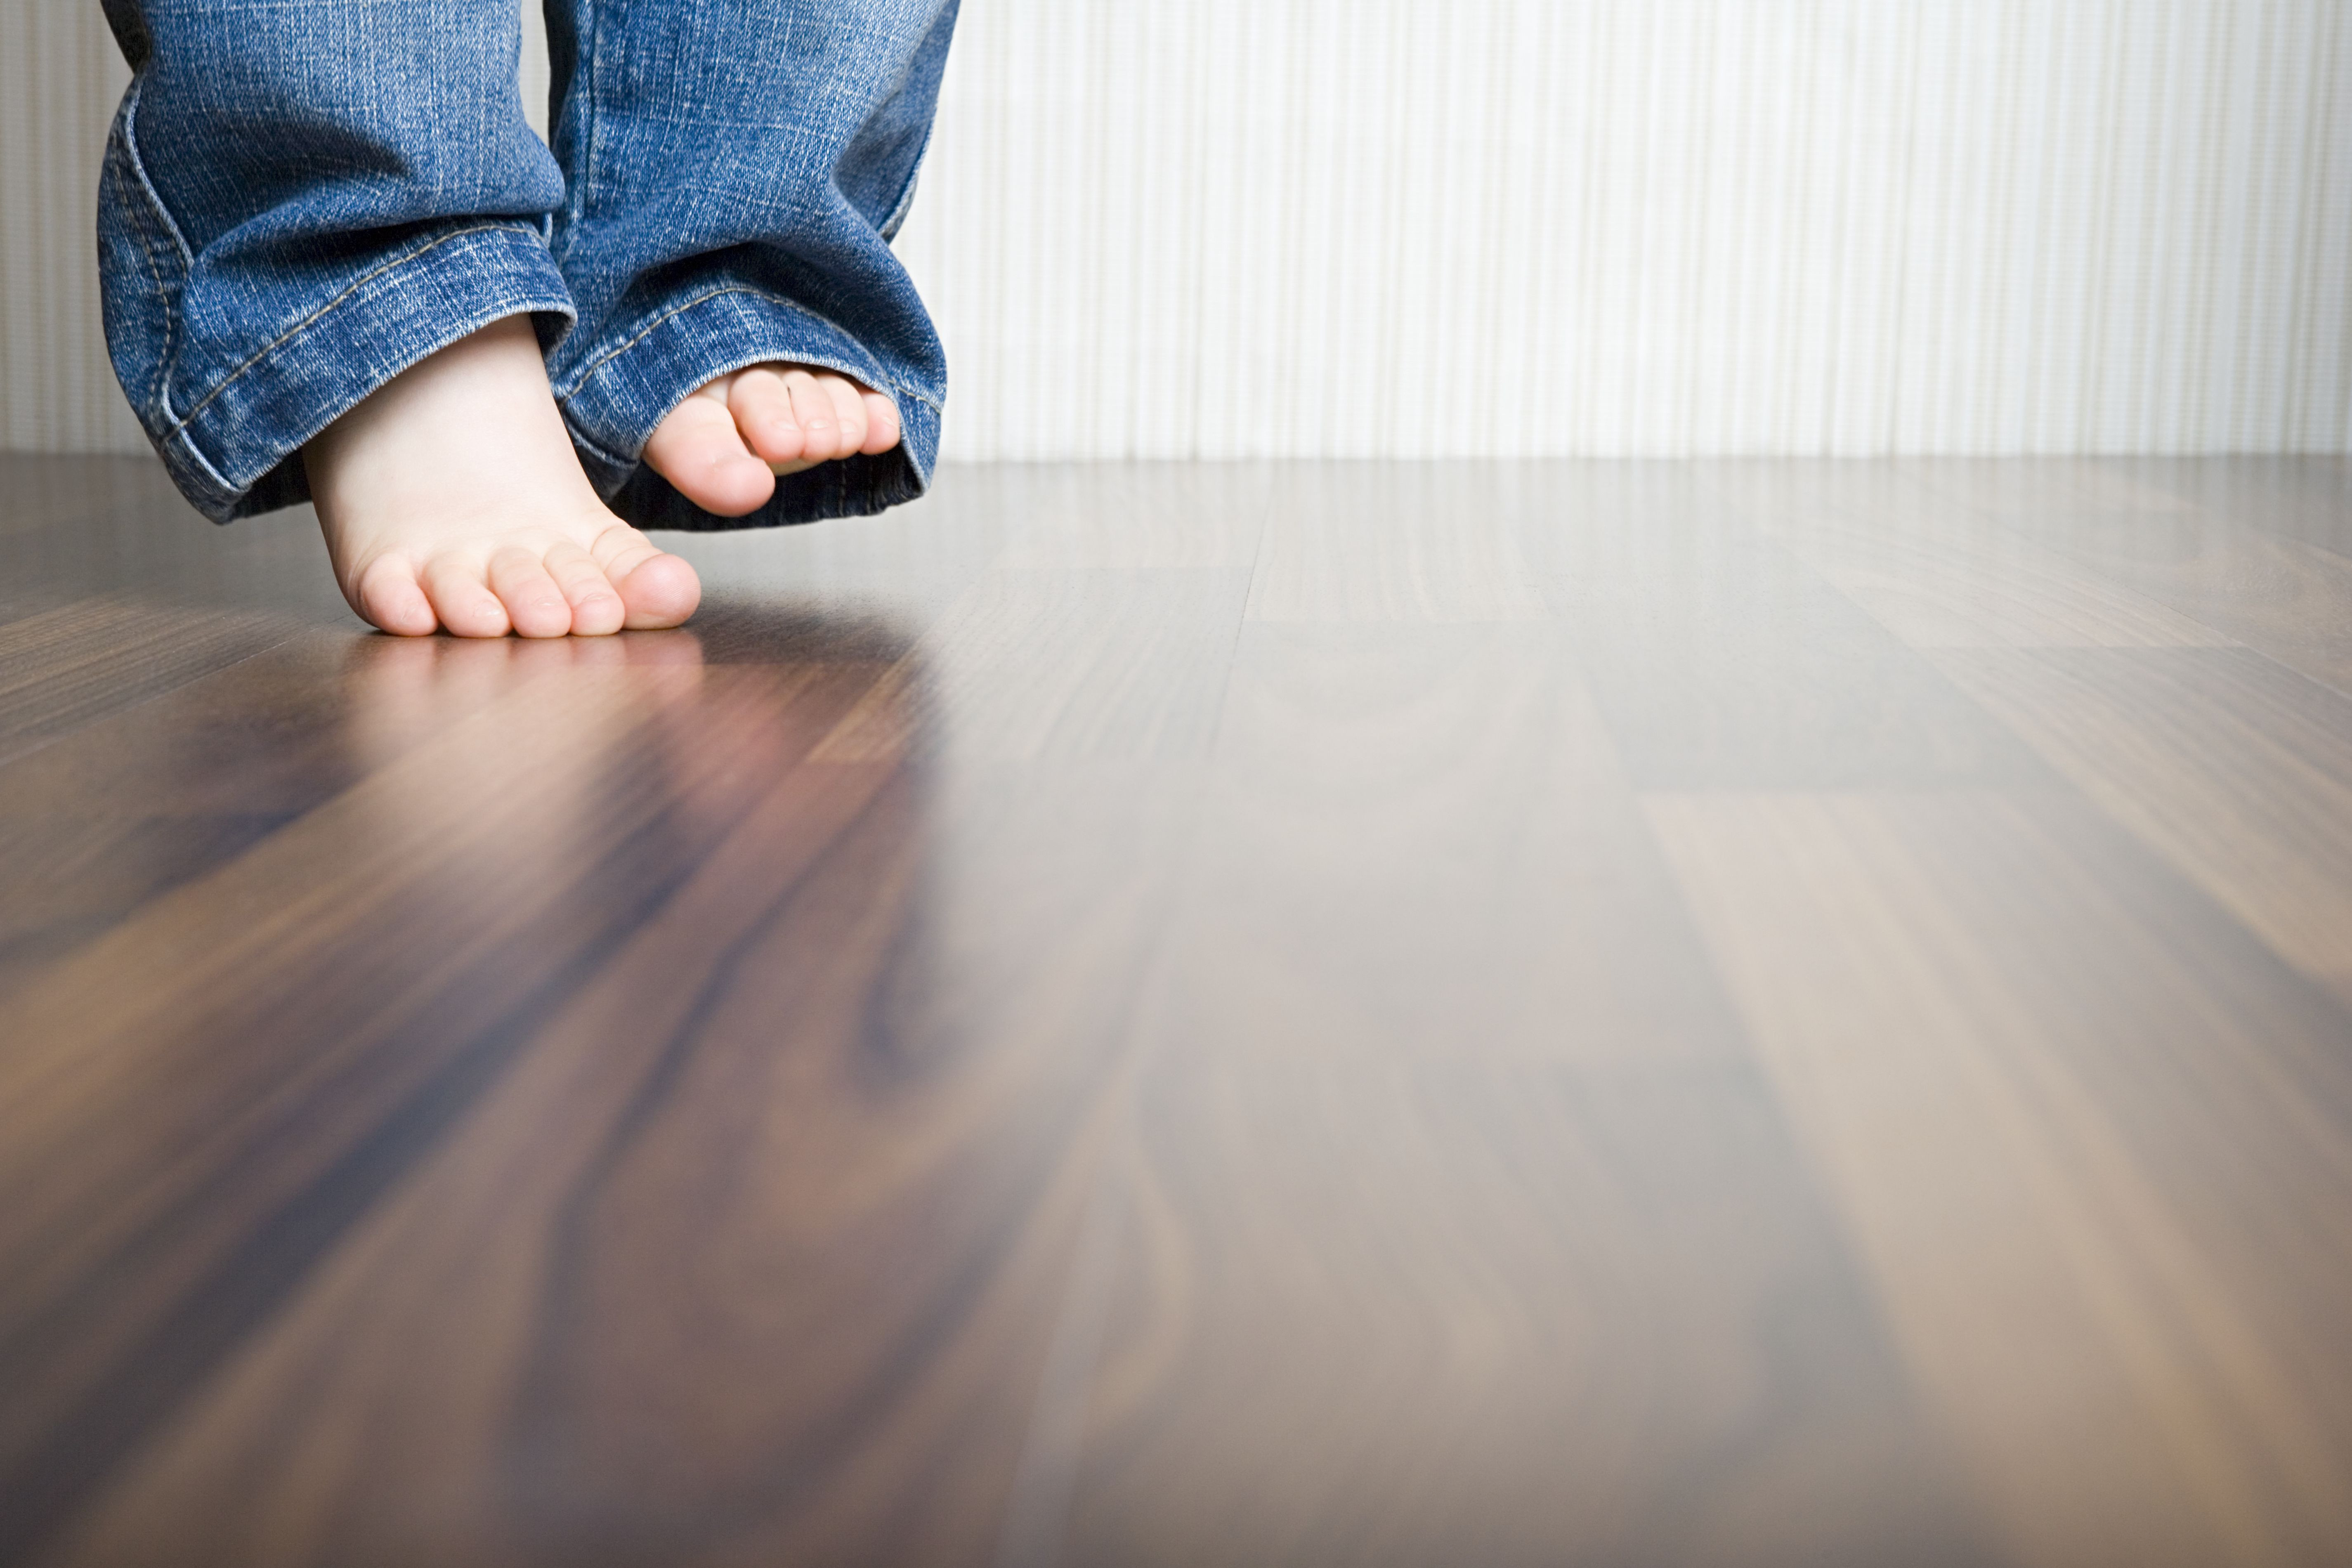 hardwood floor cleaner that leaves a shine of how to clean hardwood floors best way to clean wood flooring with regard to 1512149908 gettyimages 75403973